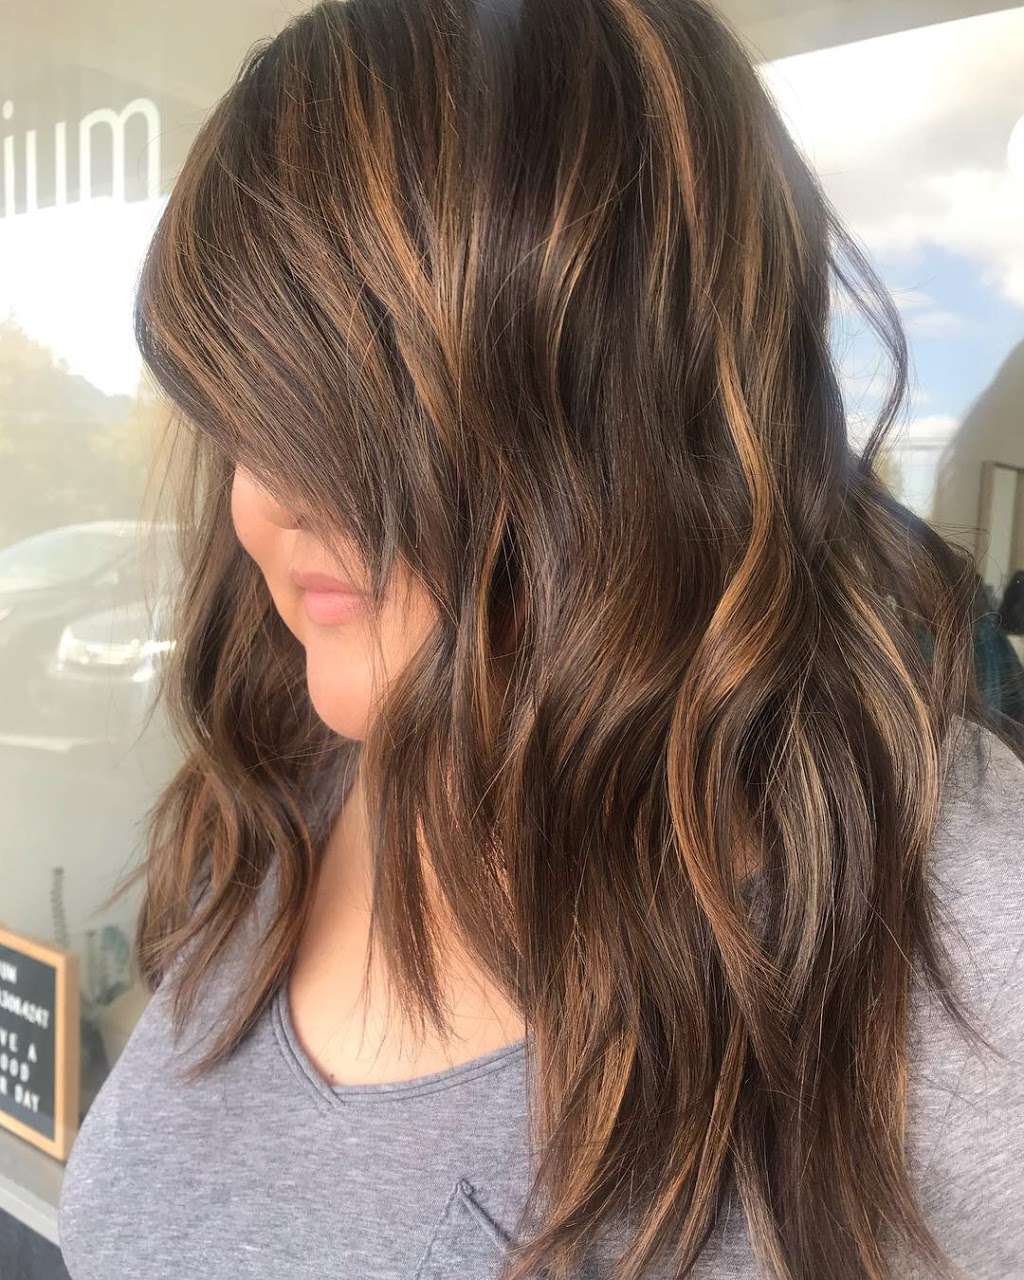 Hair By Erna Hobbs | 10633 S Foothill Blvd, Cupertino, CA 95014 | Phone: (408) 831-2881